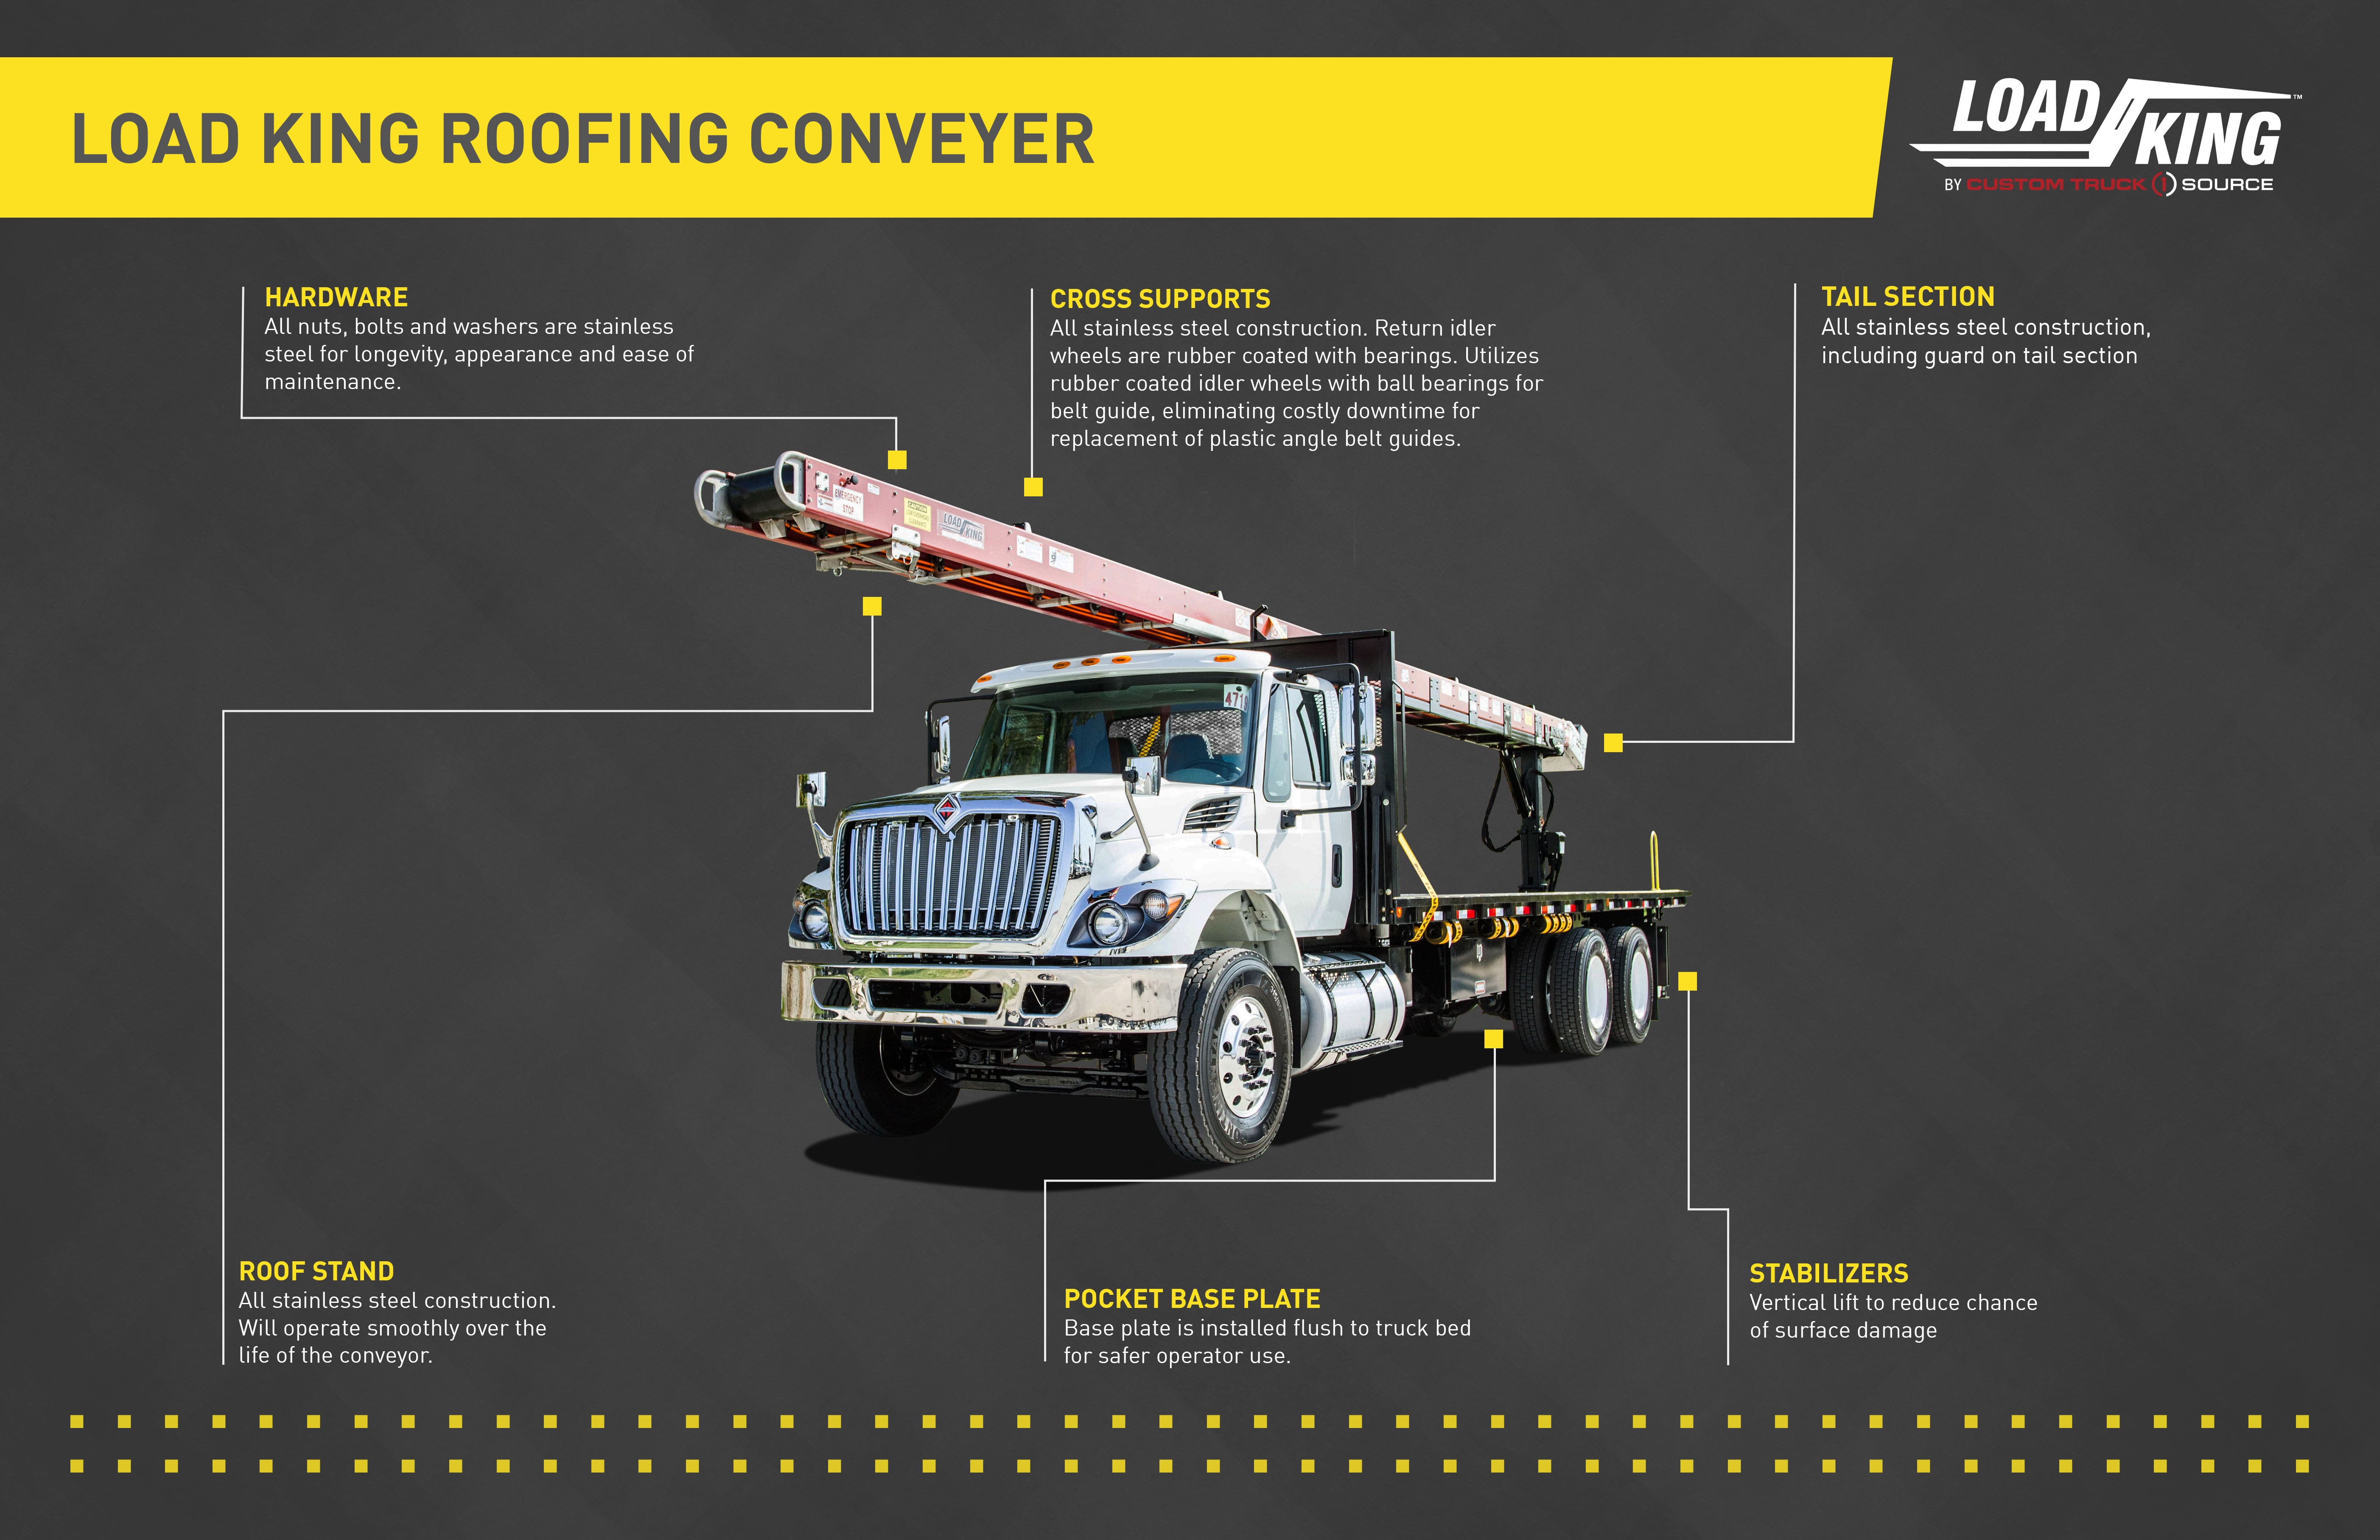 Load King's Roofing Conveyor Infographic